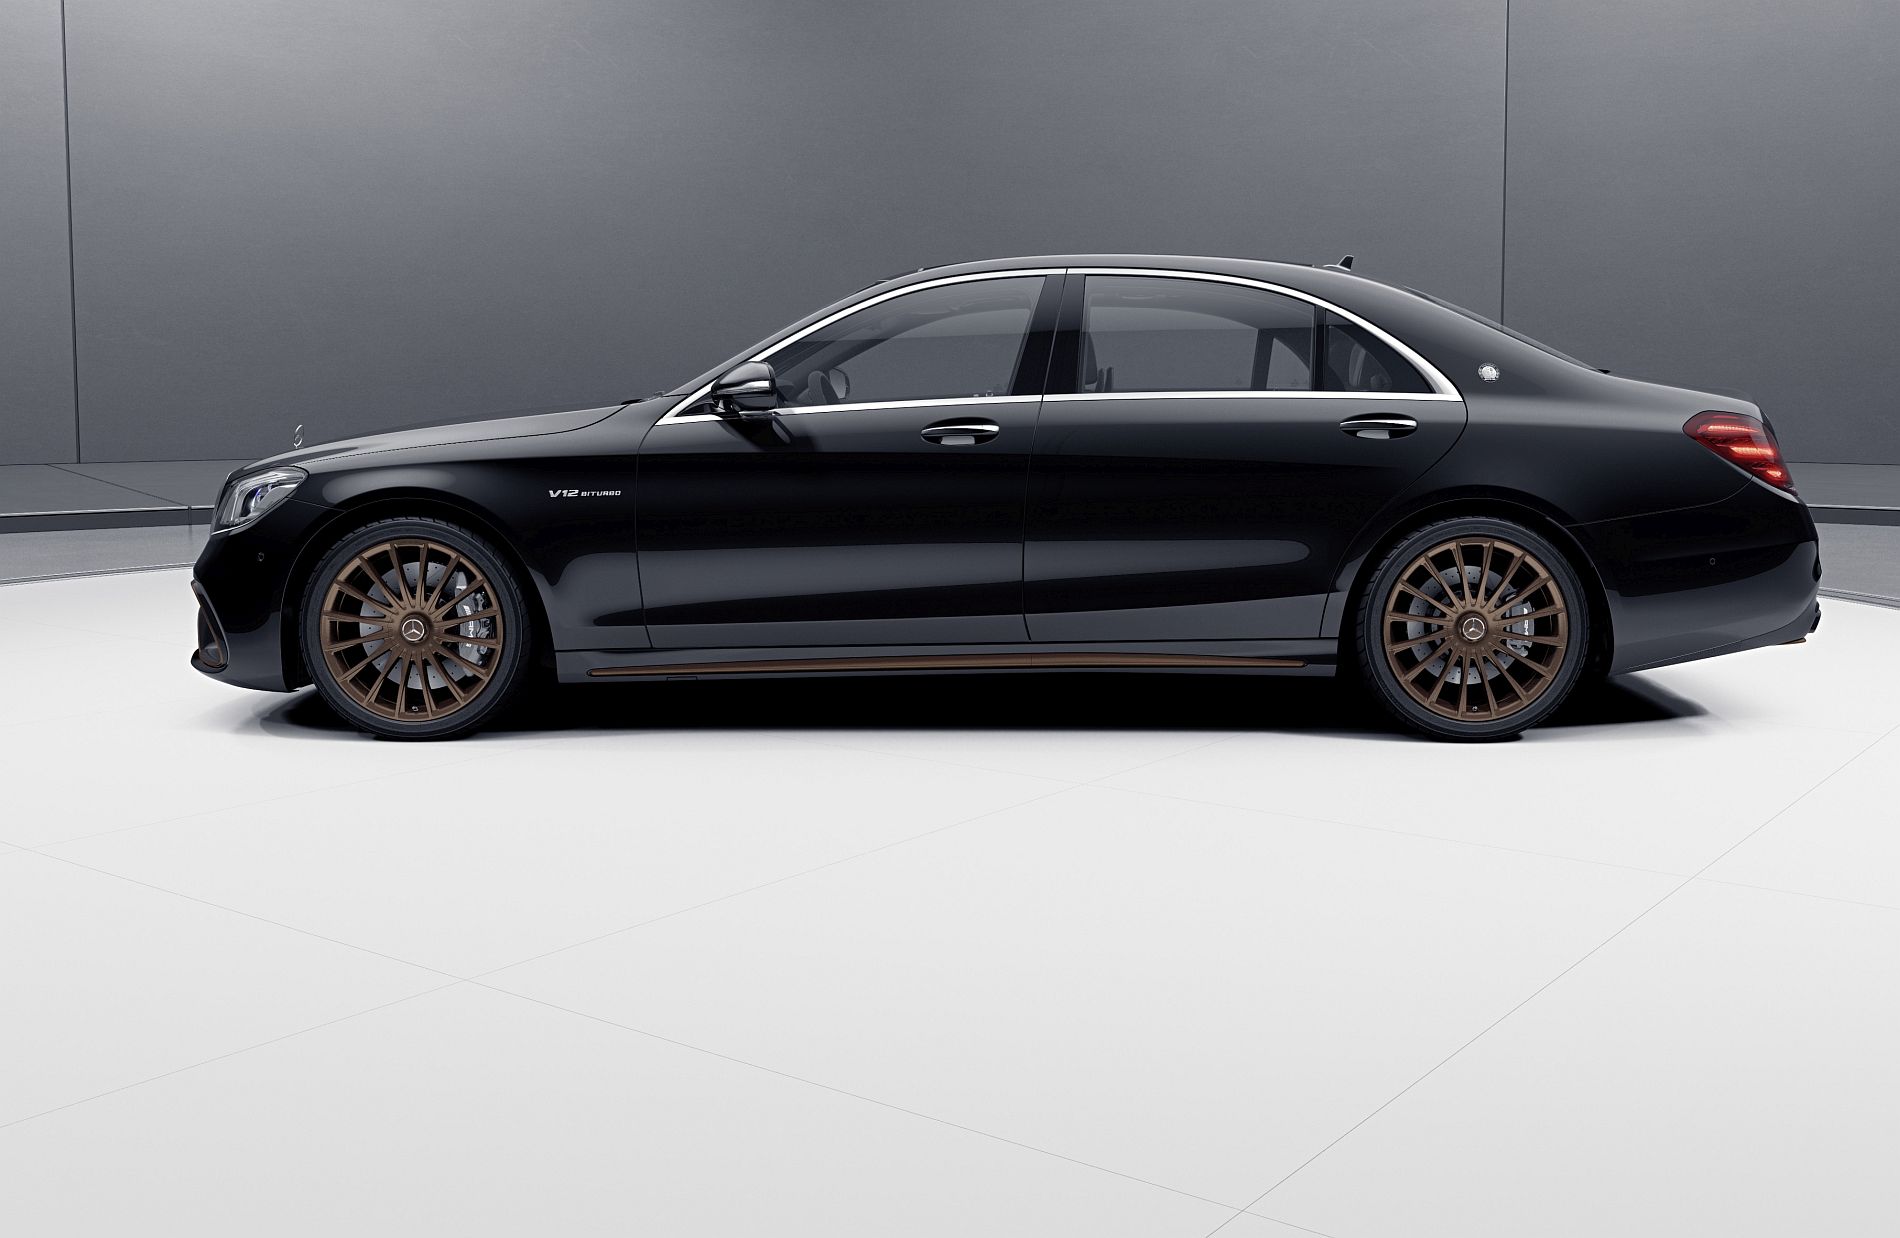 Mercedes-AMG S 65 Final Edition

Mercedes-AMG S 65 Final Edition